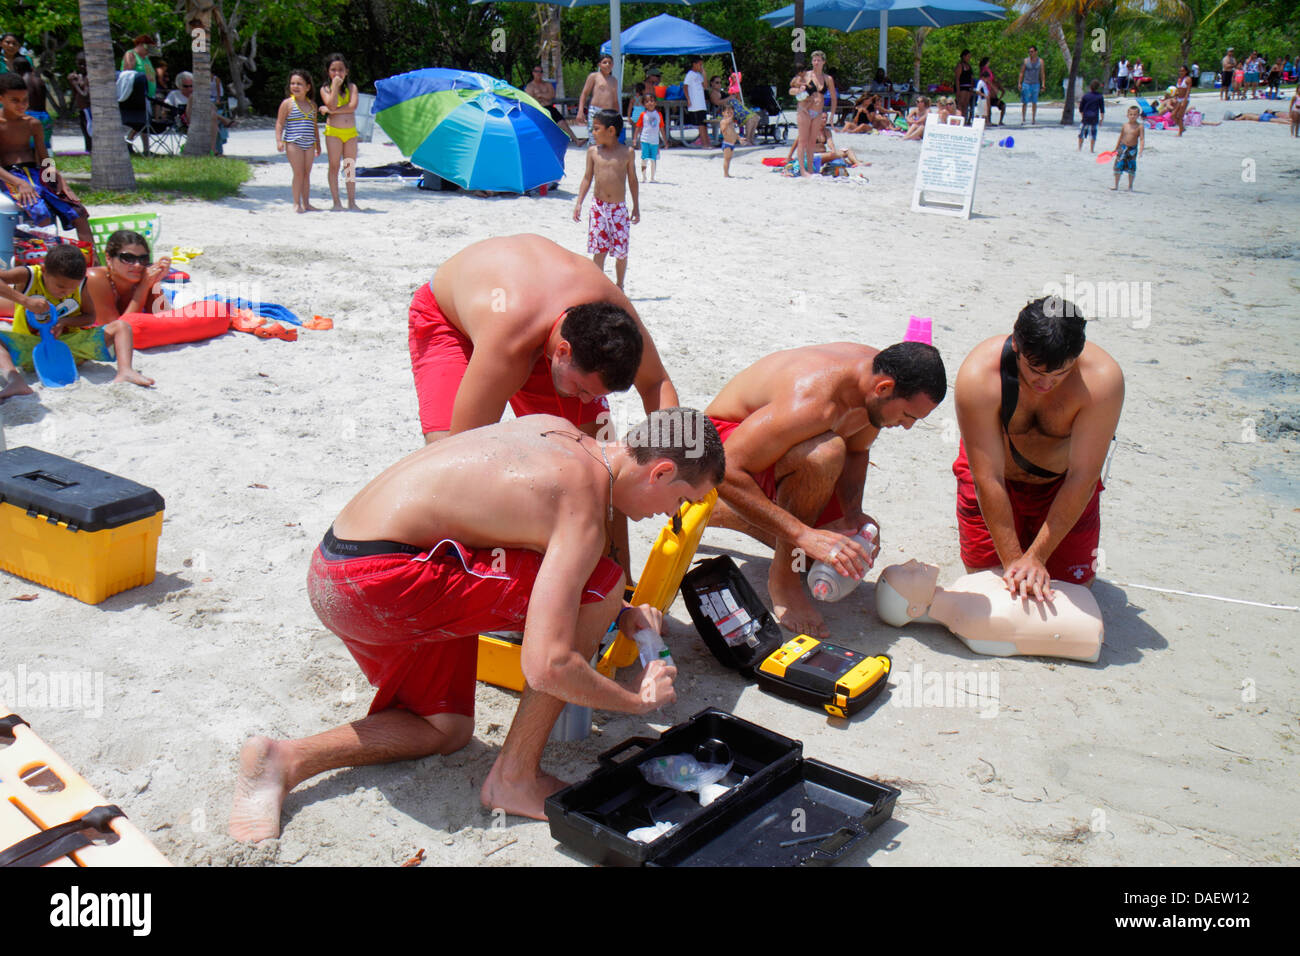 Miami Florida,Homestead,Homestead Bayfront Park,Biscayne Bay water,lifeguards,lifeguard training,rescue,man men male adult adults,CPR dummy,mannequin, Stock Photo